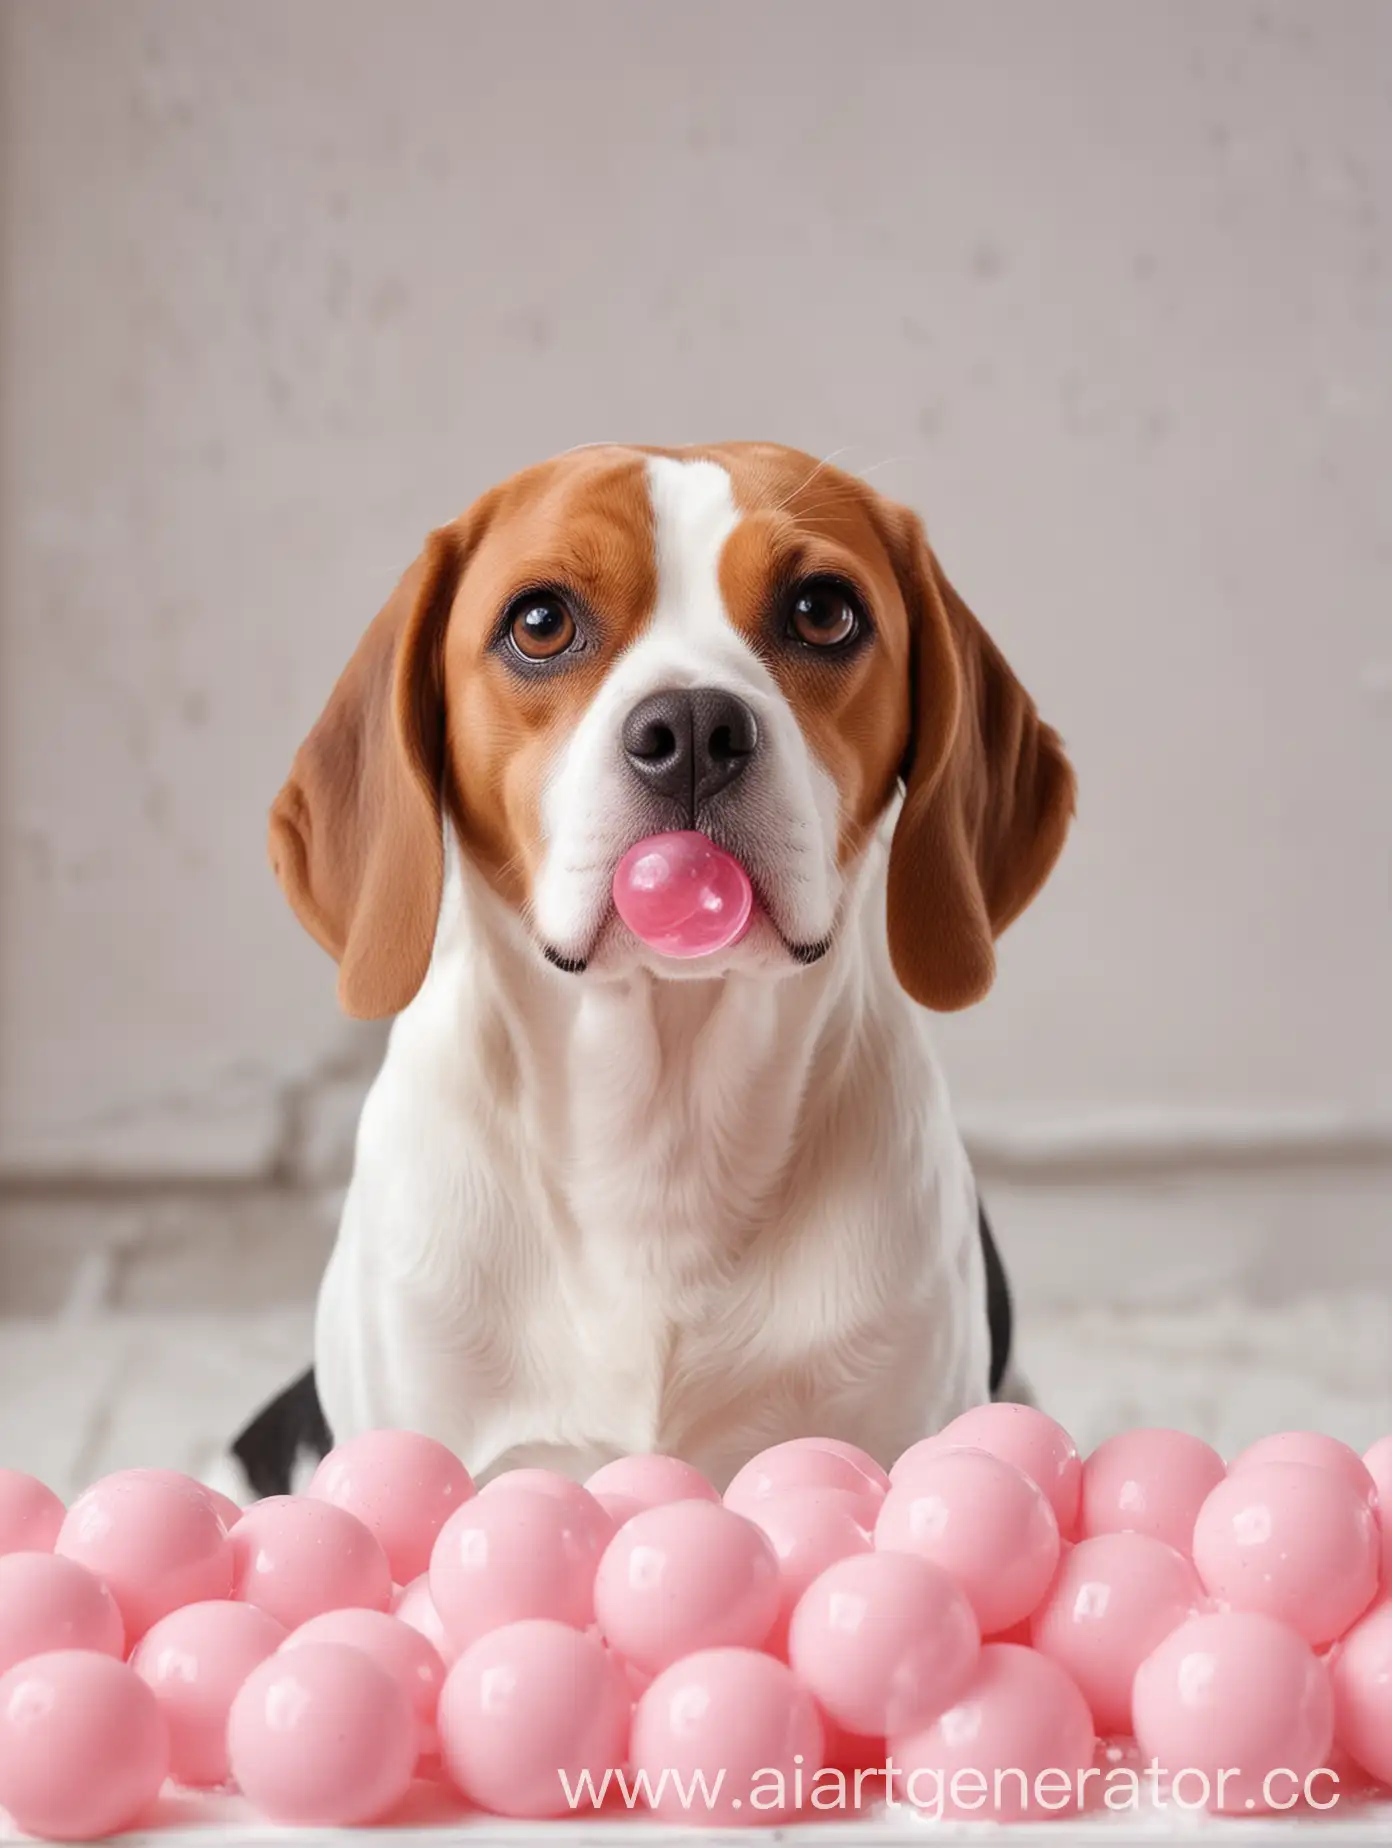 Beagle-Dog-Surrounded-by-Pink-Chewing-Gum-Bubbles-in-a-White-Room